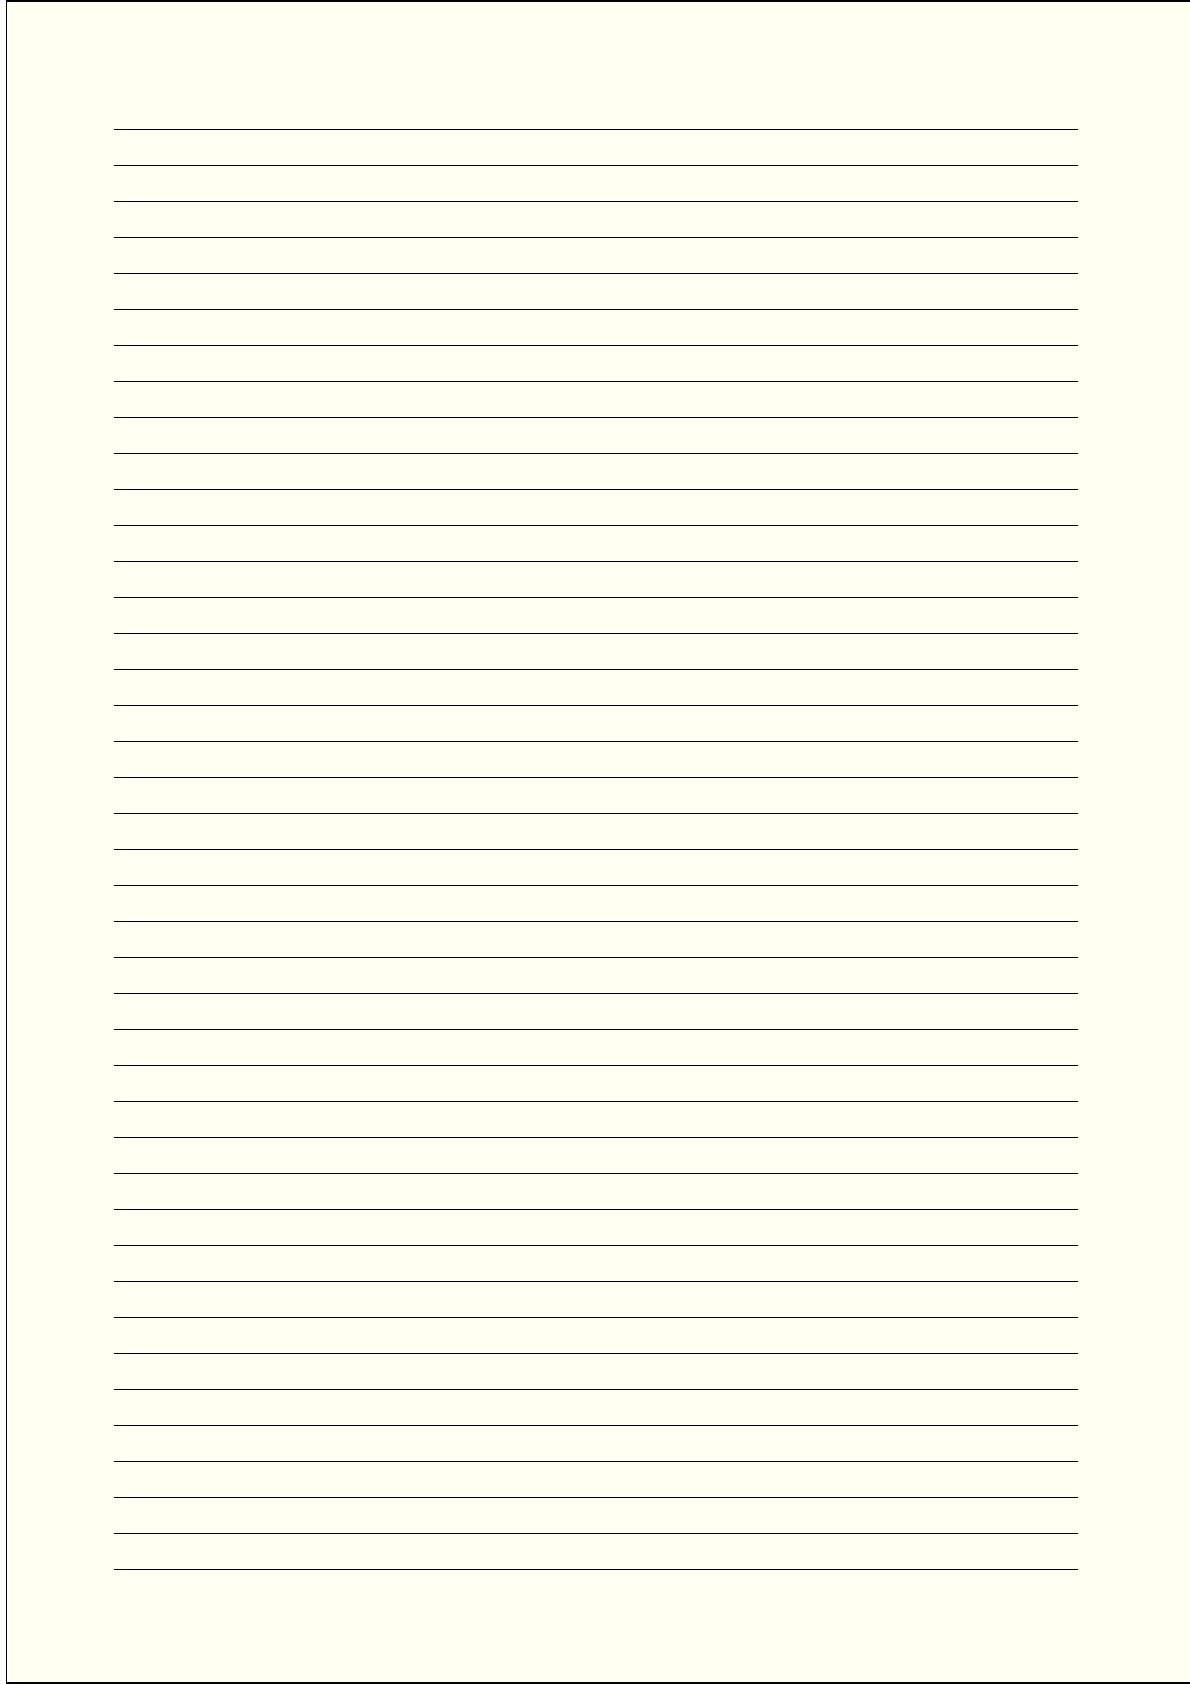 A4 Size Lined Paper With Narrow Black Lines Pale Yellow Free Download